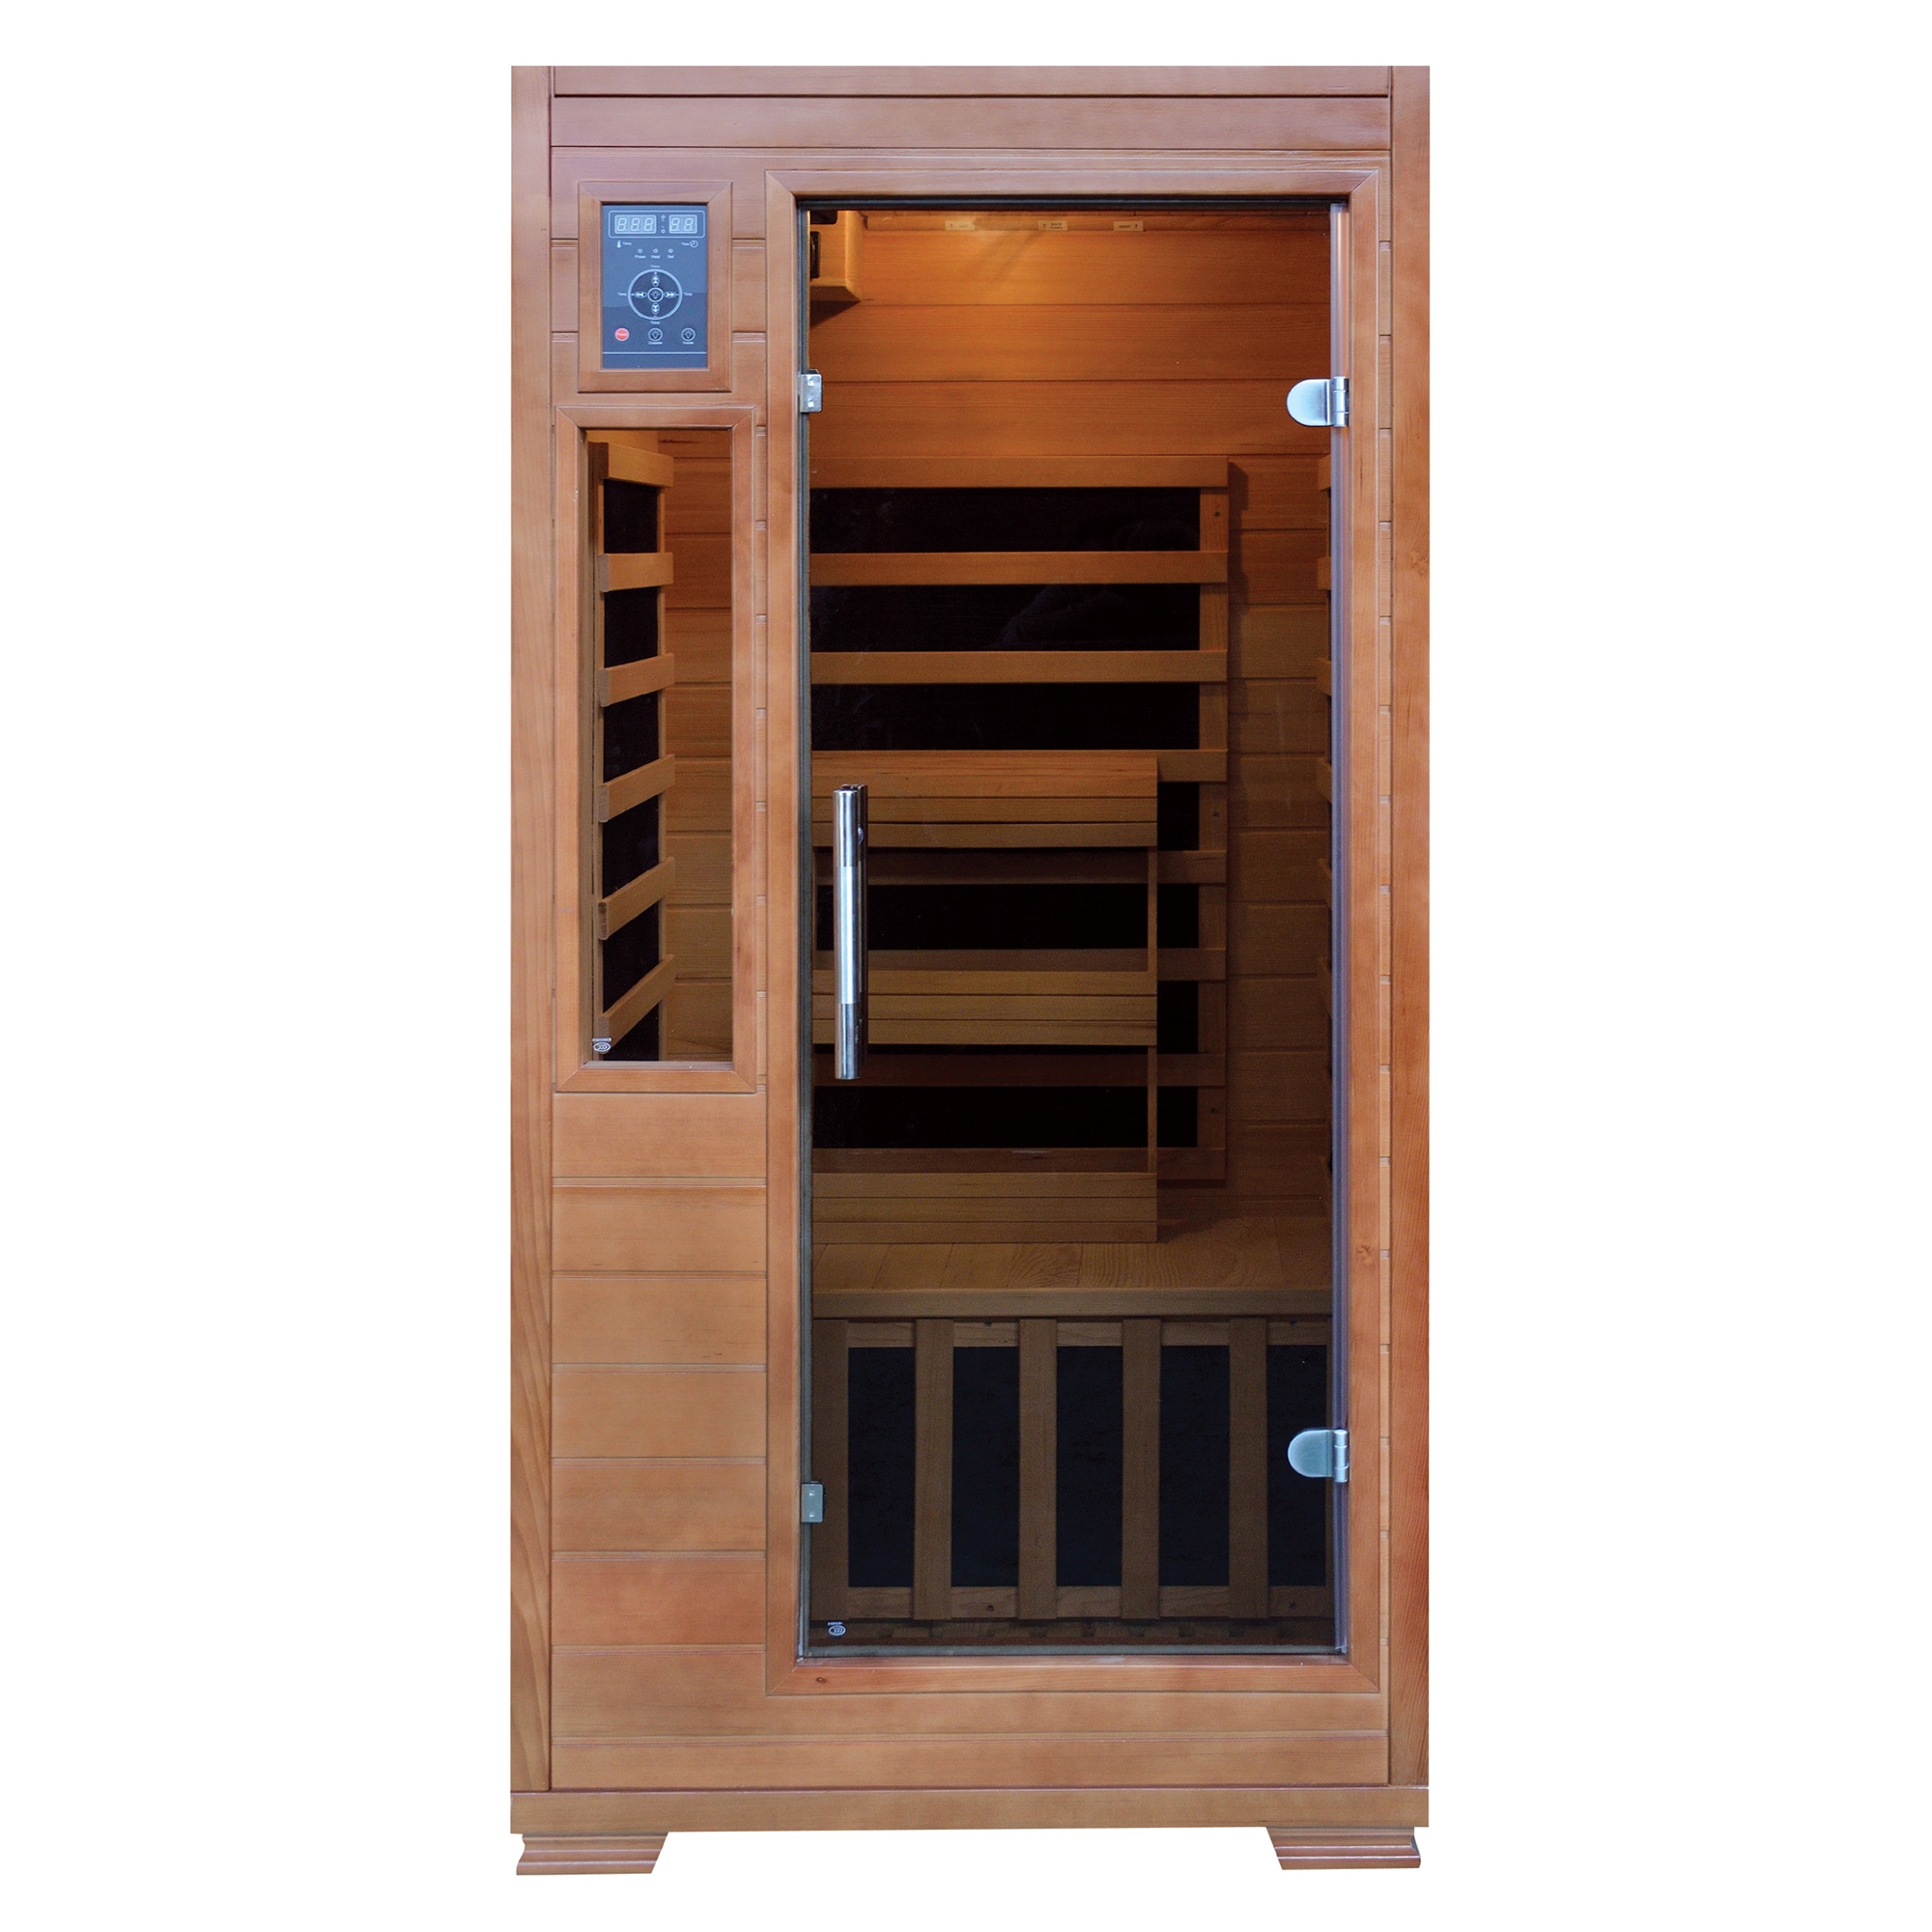 Majestic 75-in H x 36-in W x 36-in D Hemlock Wood in the Saunas department at Lowes.com